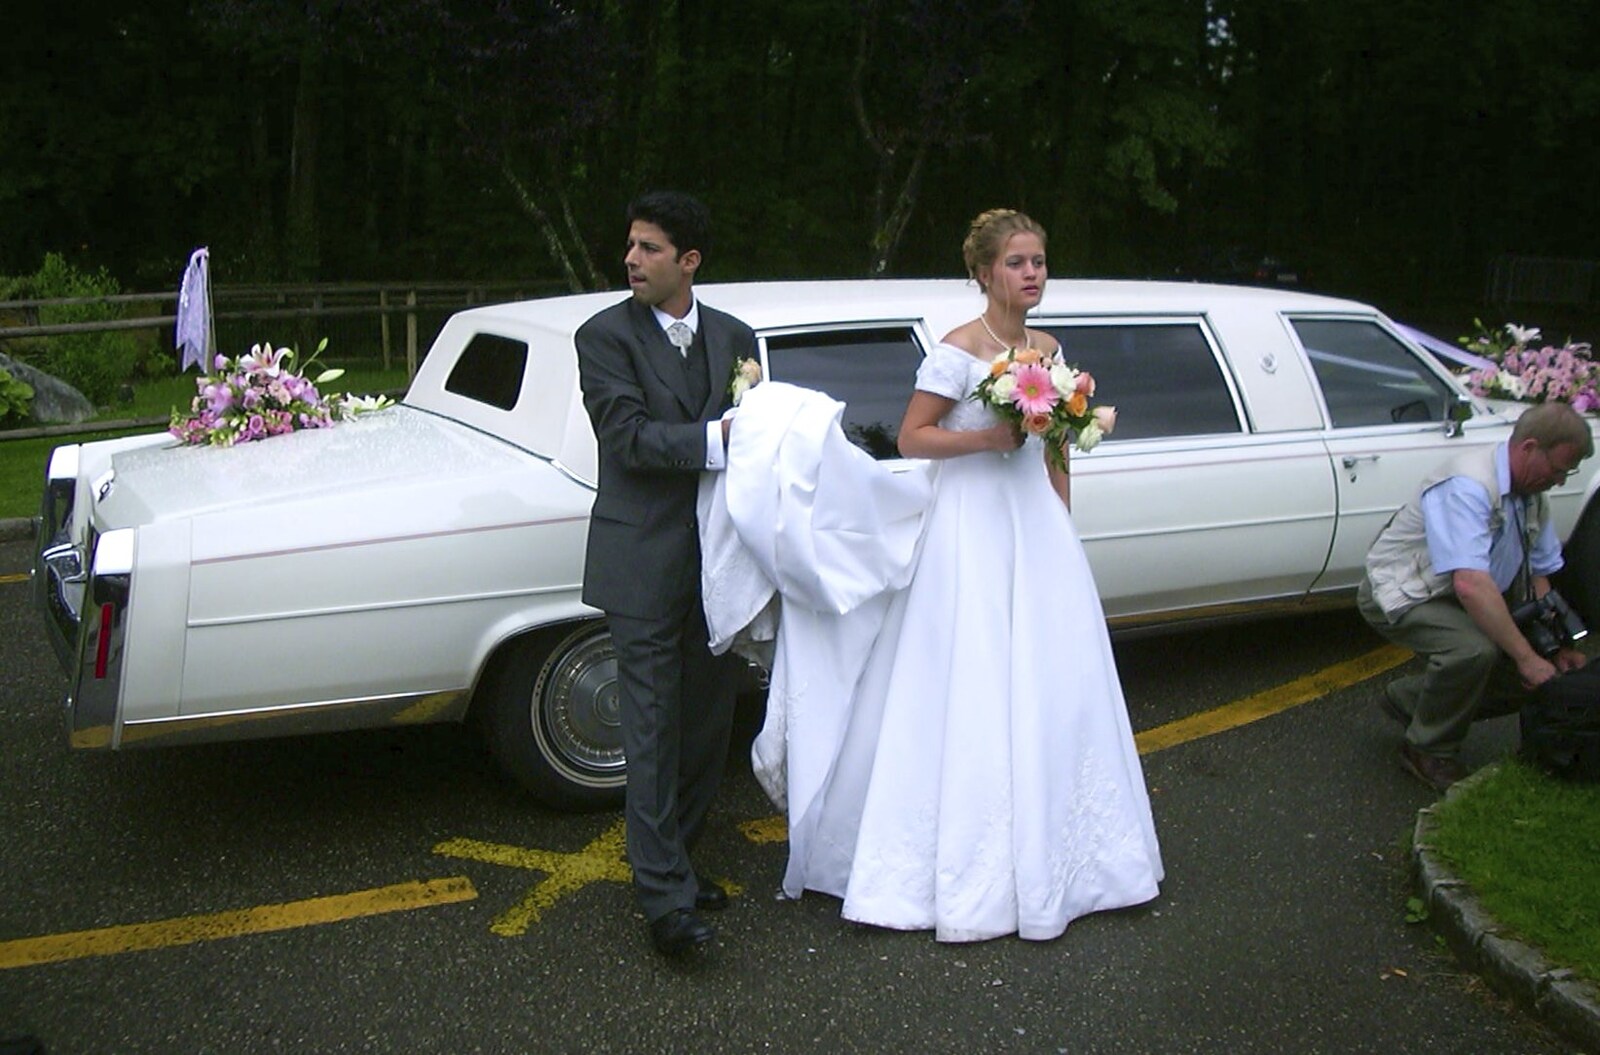 Theres a photoshoot by the bridal limo from Elisa and Luigi's Wedding, Carouge, Geneva, Switzerland - 20th July 2001